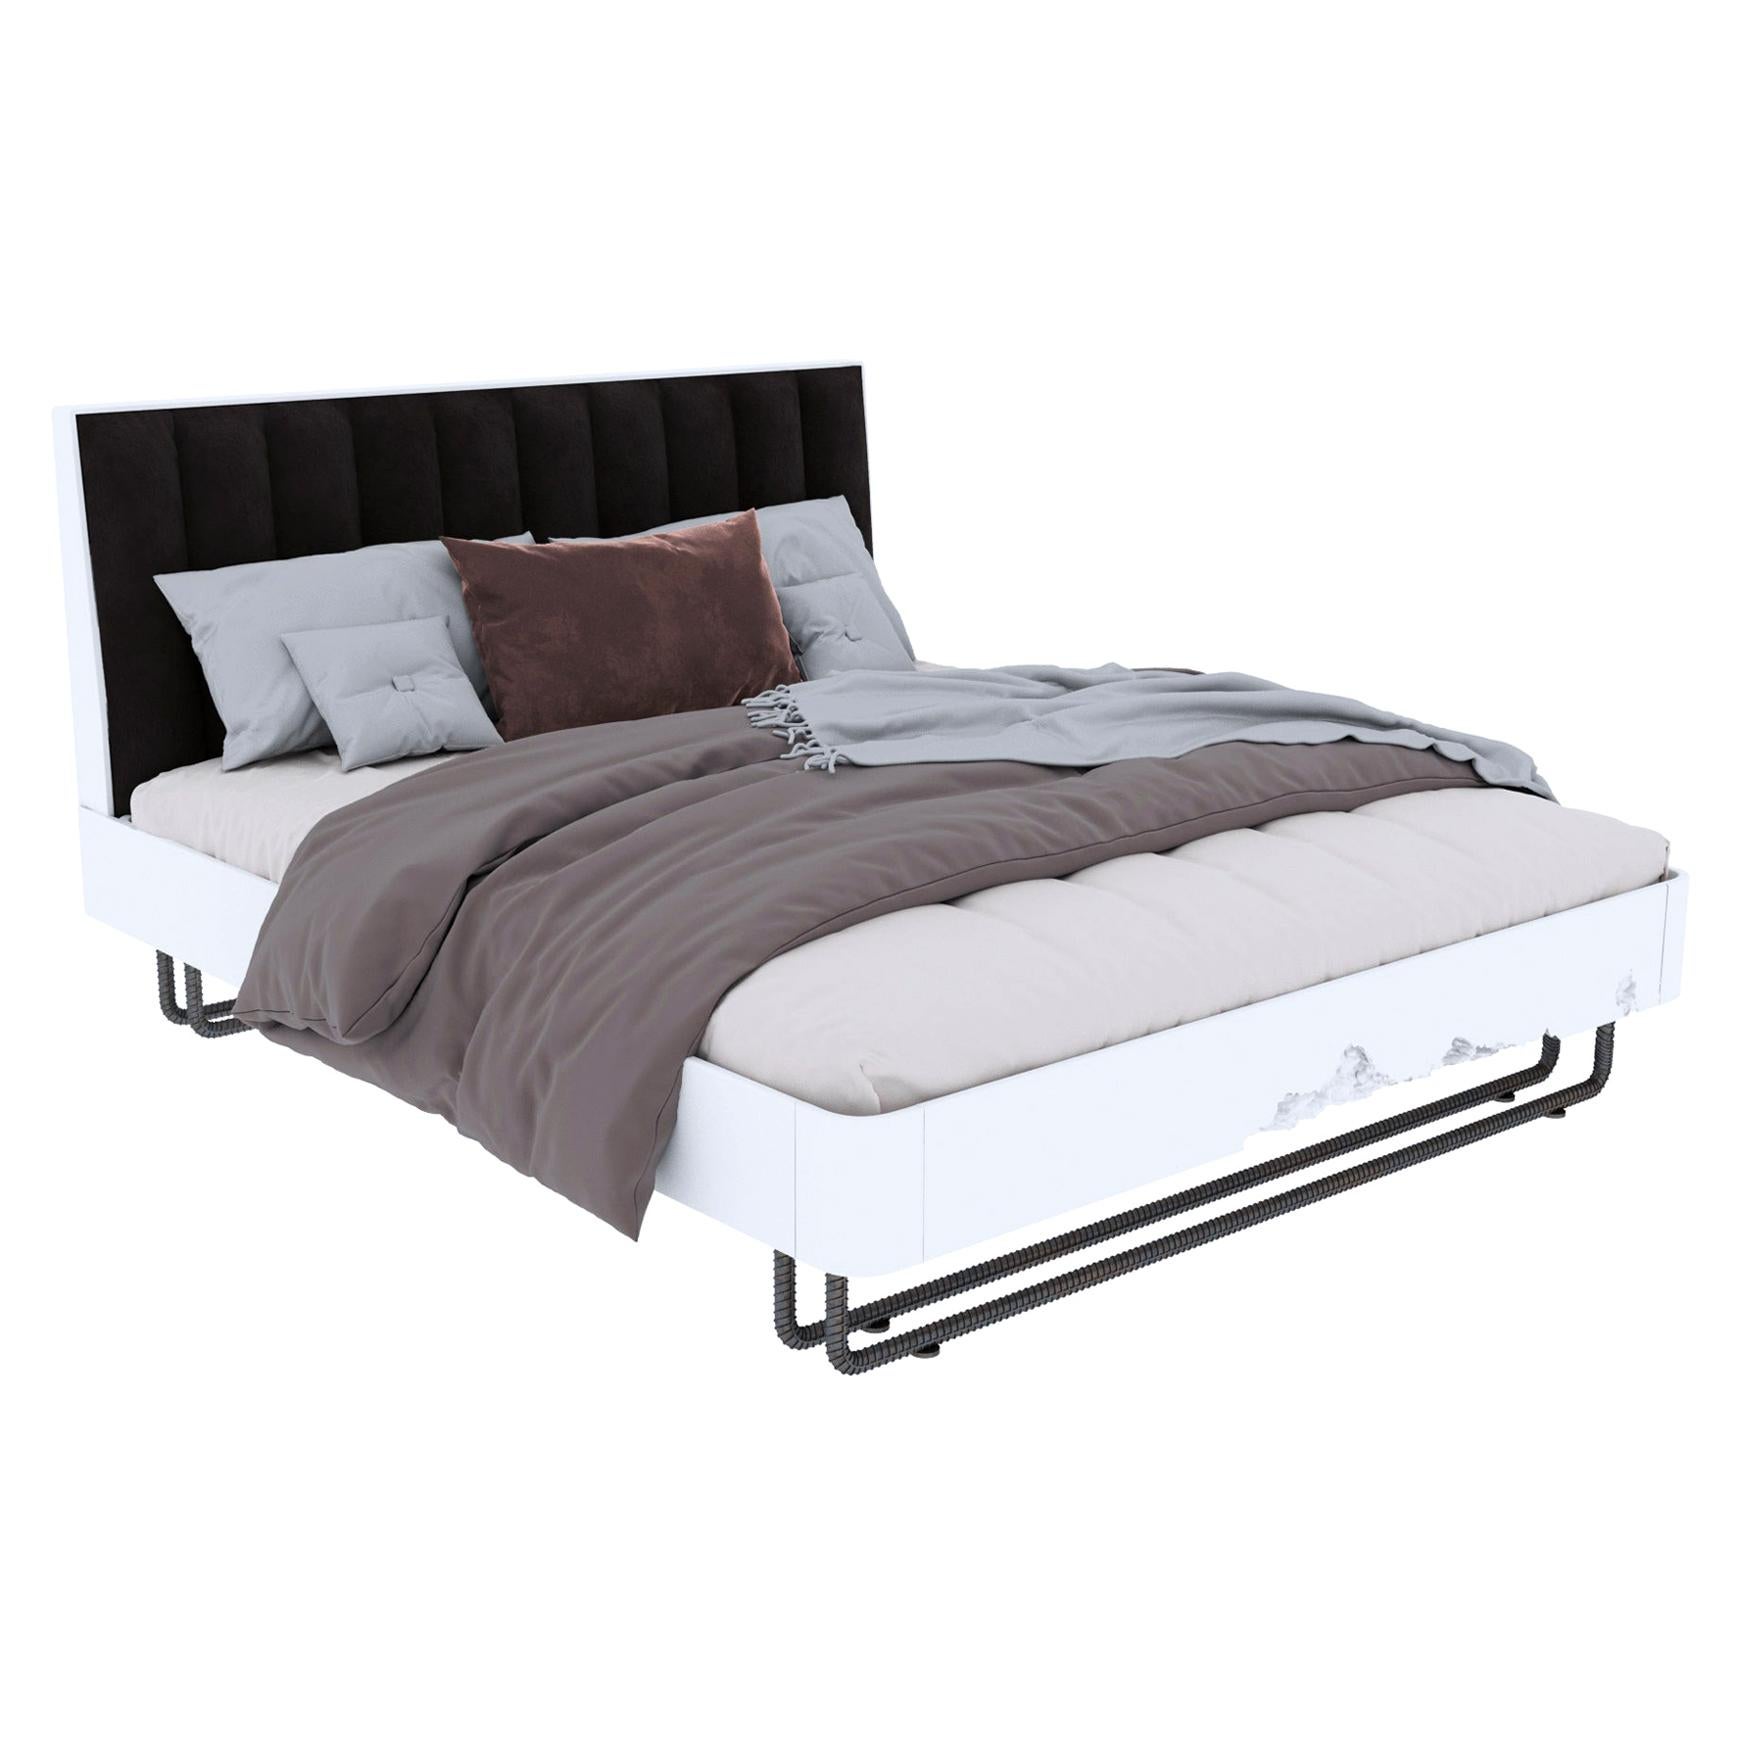 Amazing Wooden Double Bed Break Free Collection for Individual Interior For Sale